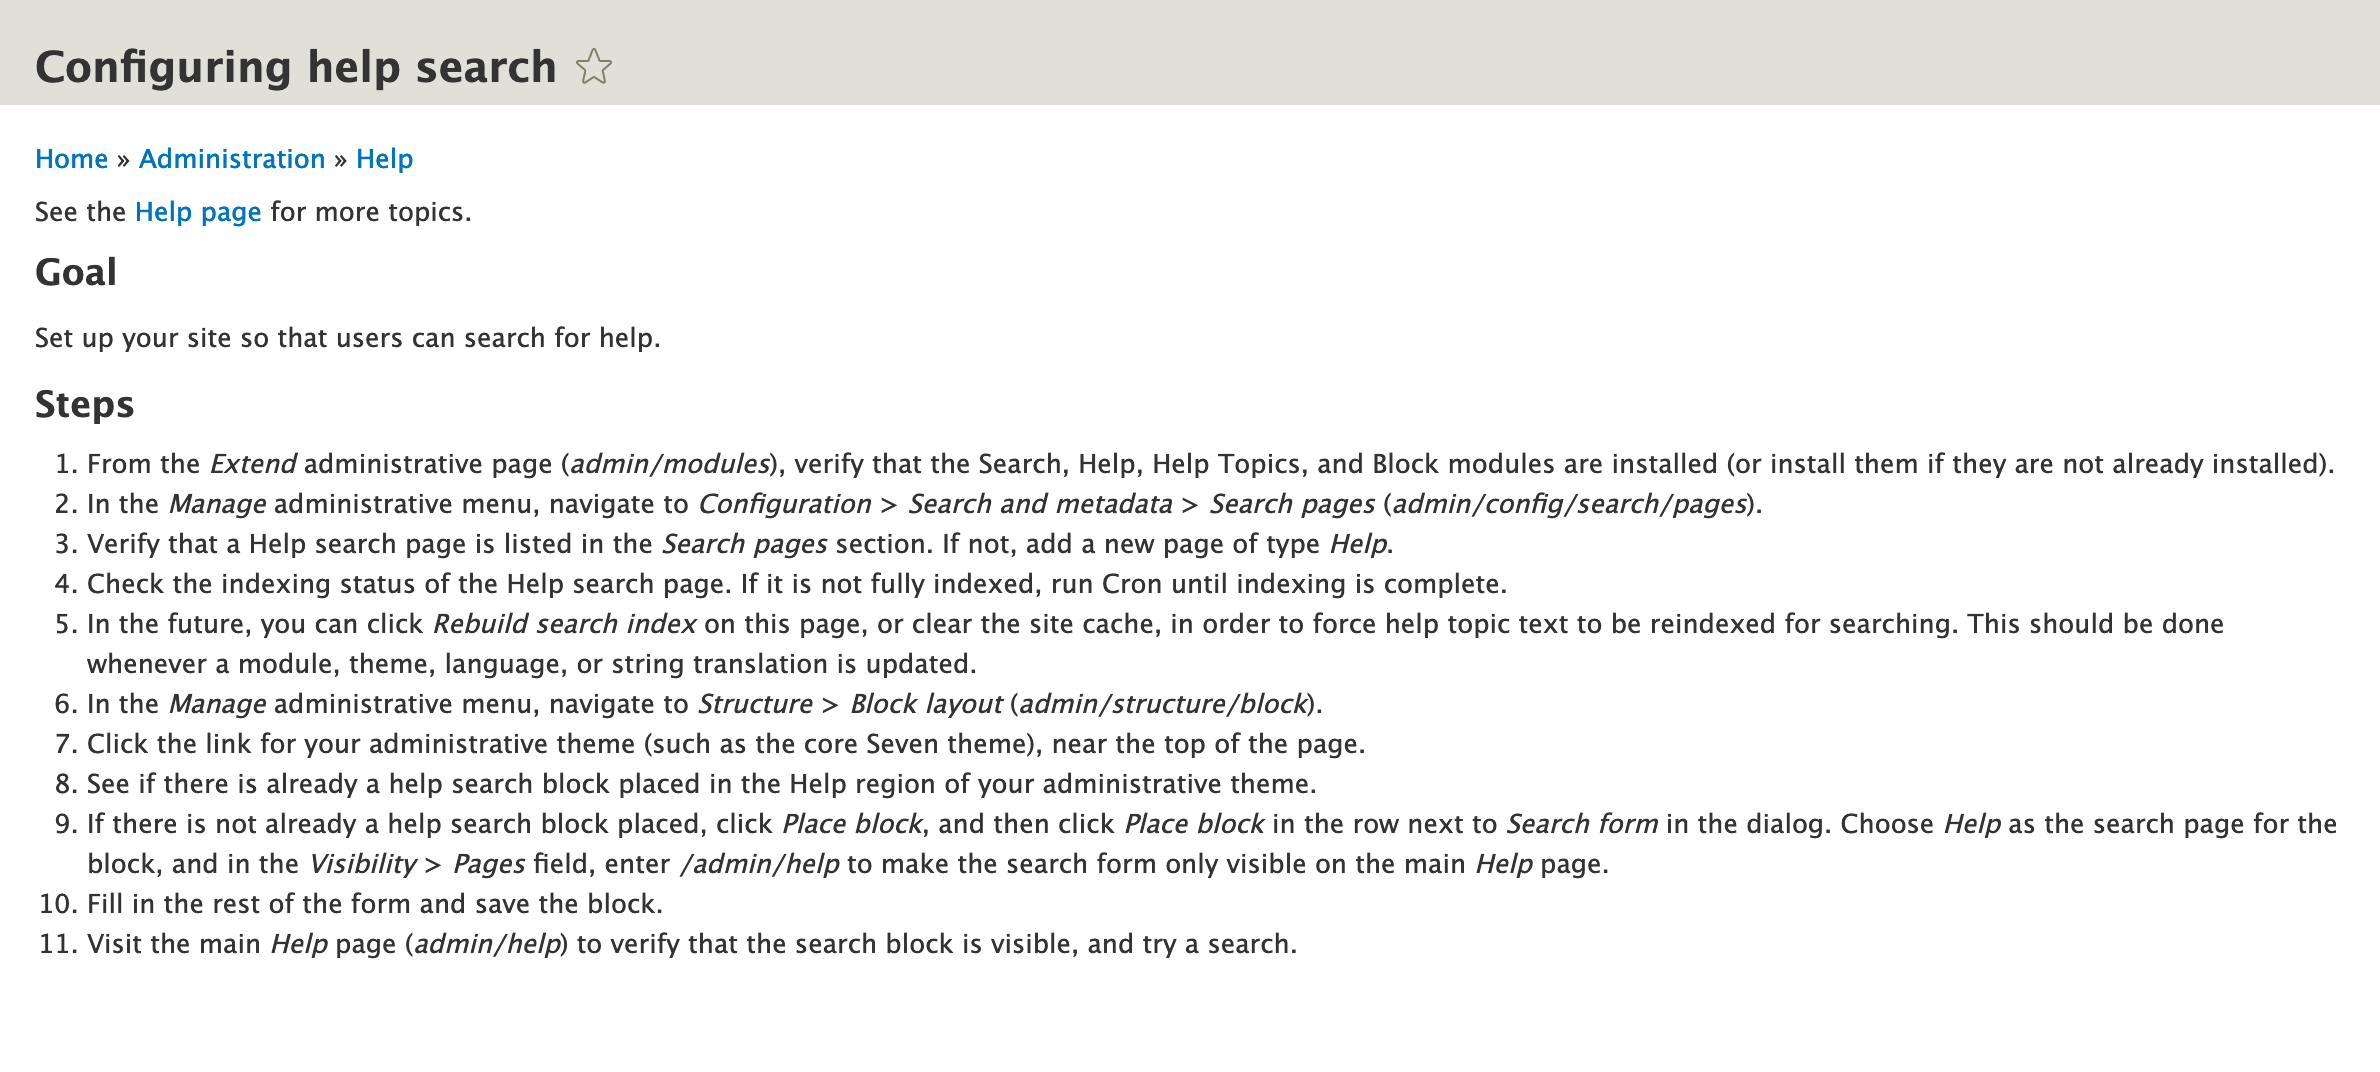 Configure Help search page, which includes step-by-step instructions.